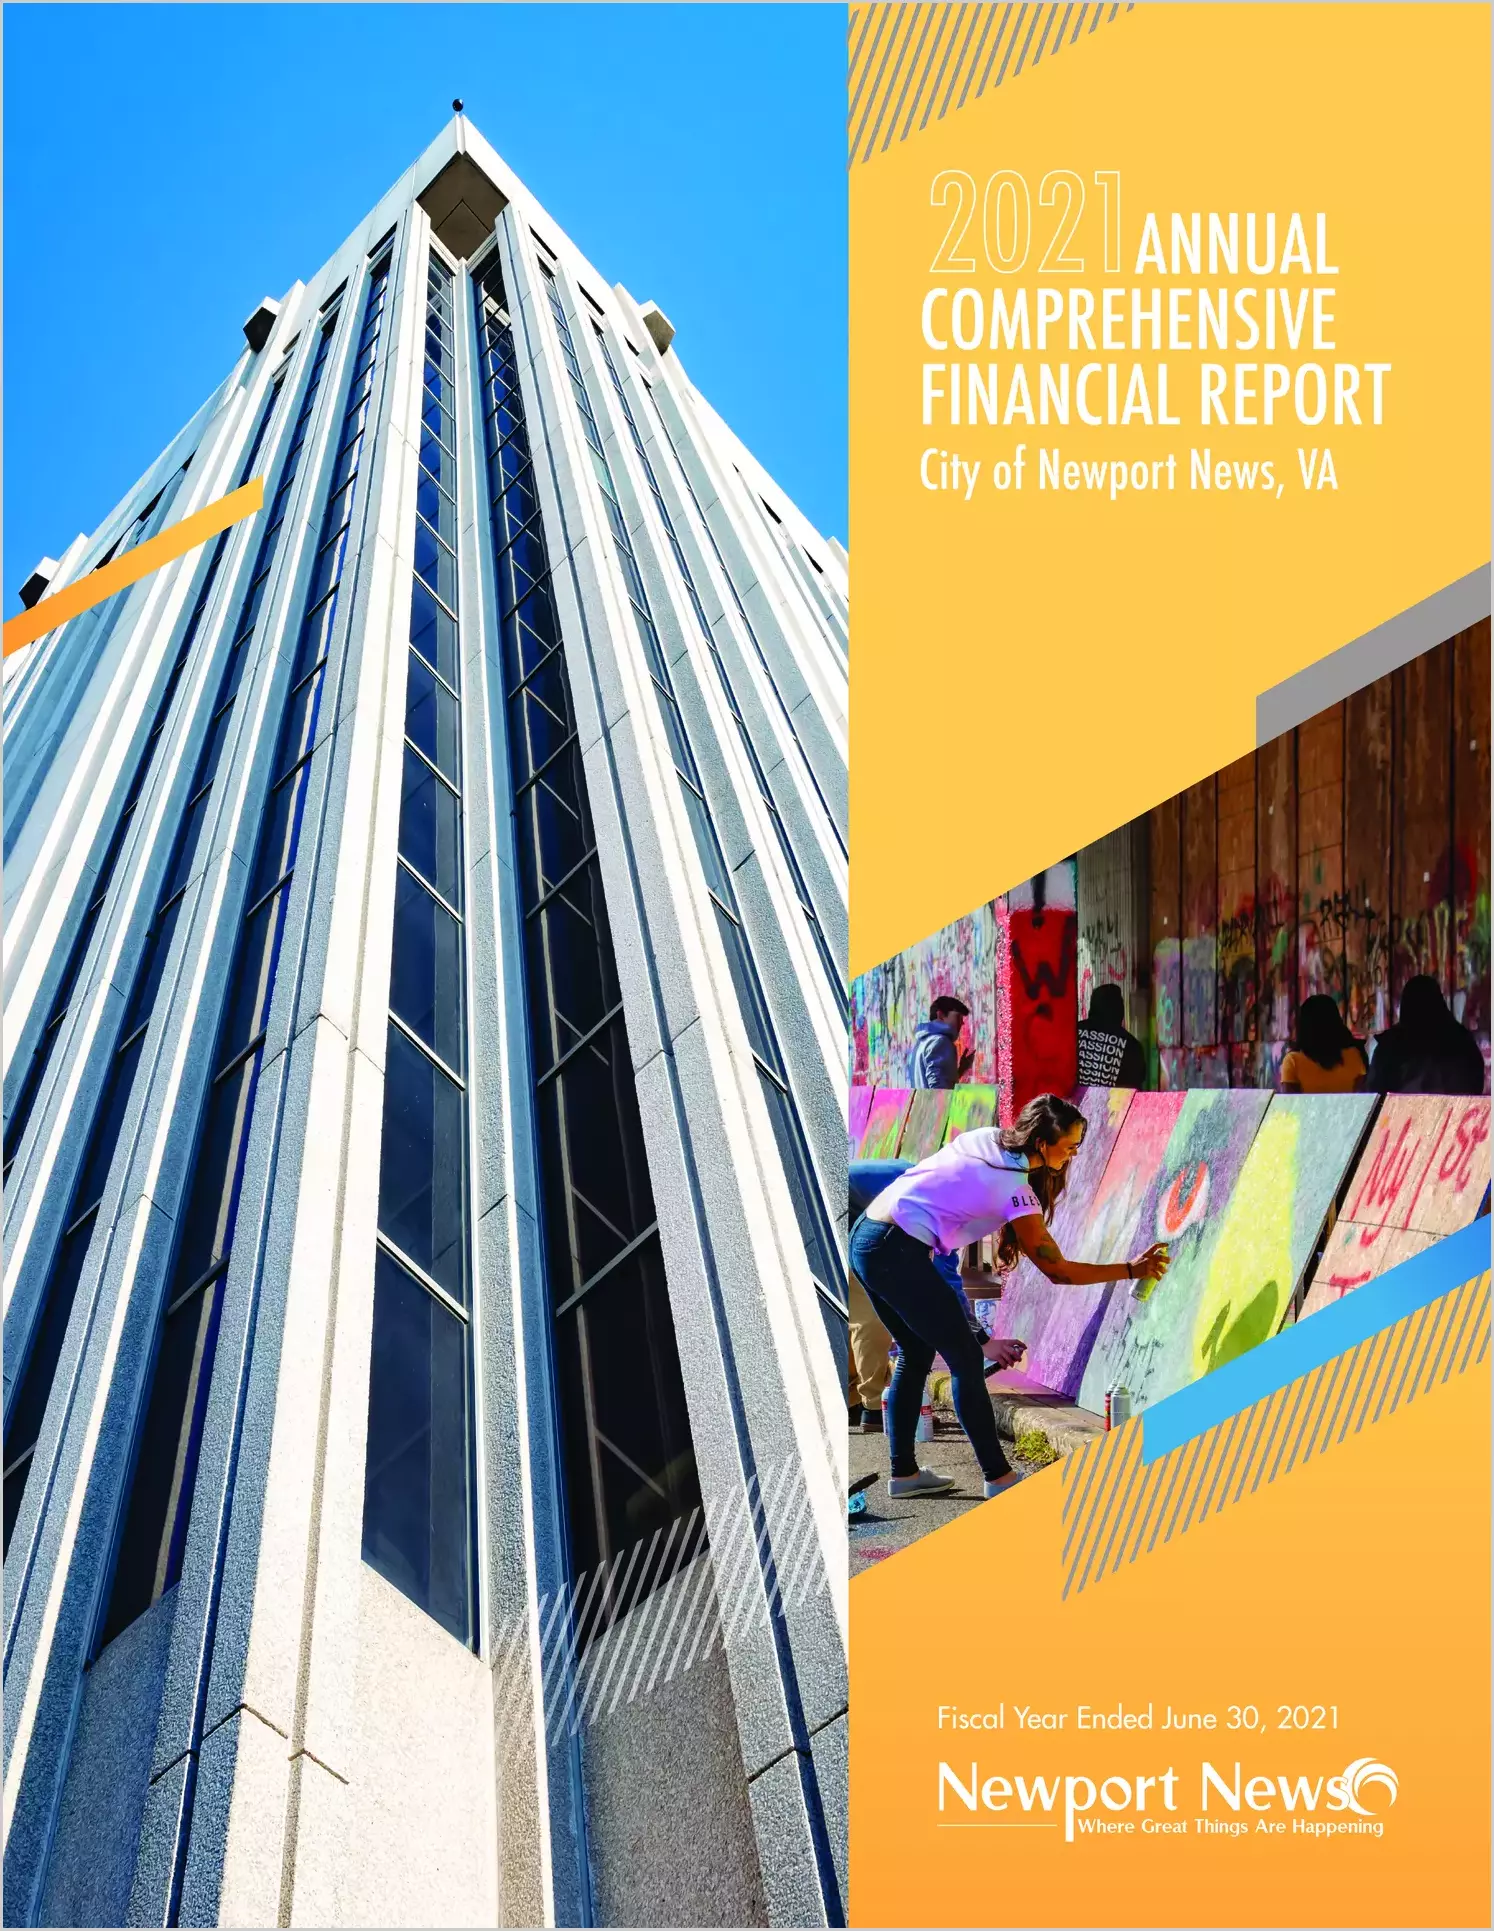 2021 Annual Financial Report for City of Newport News